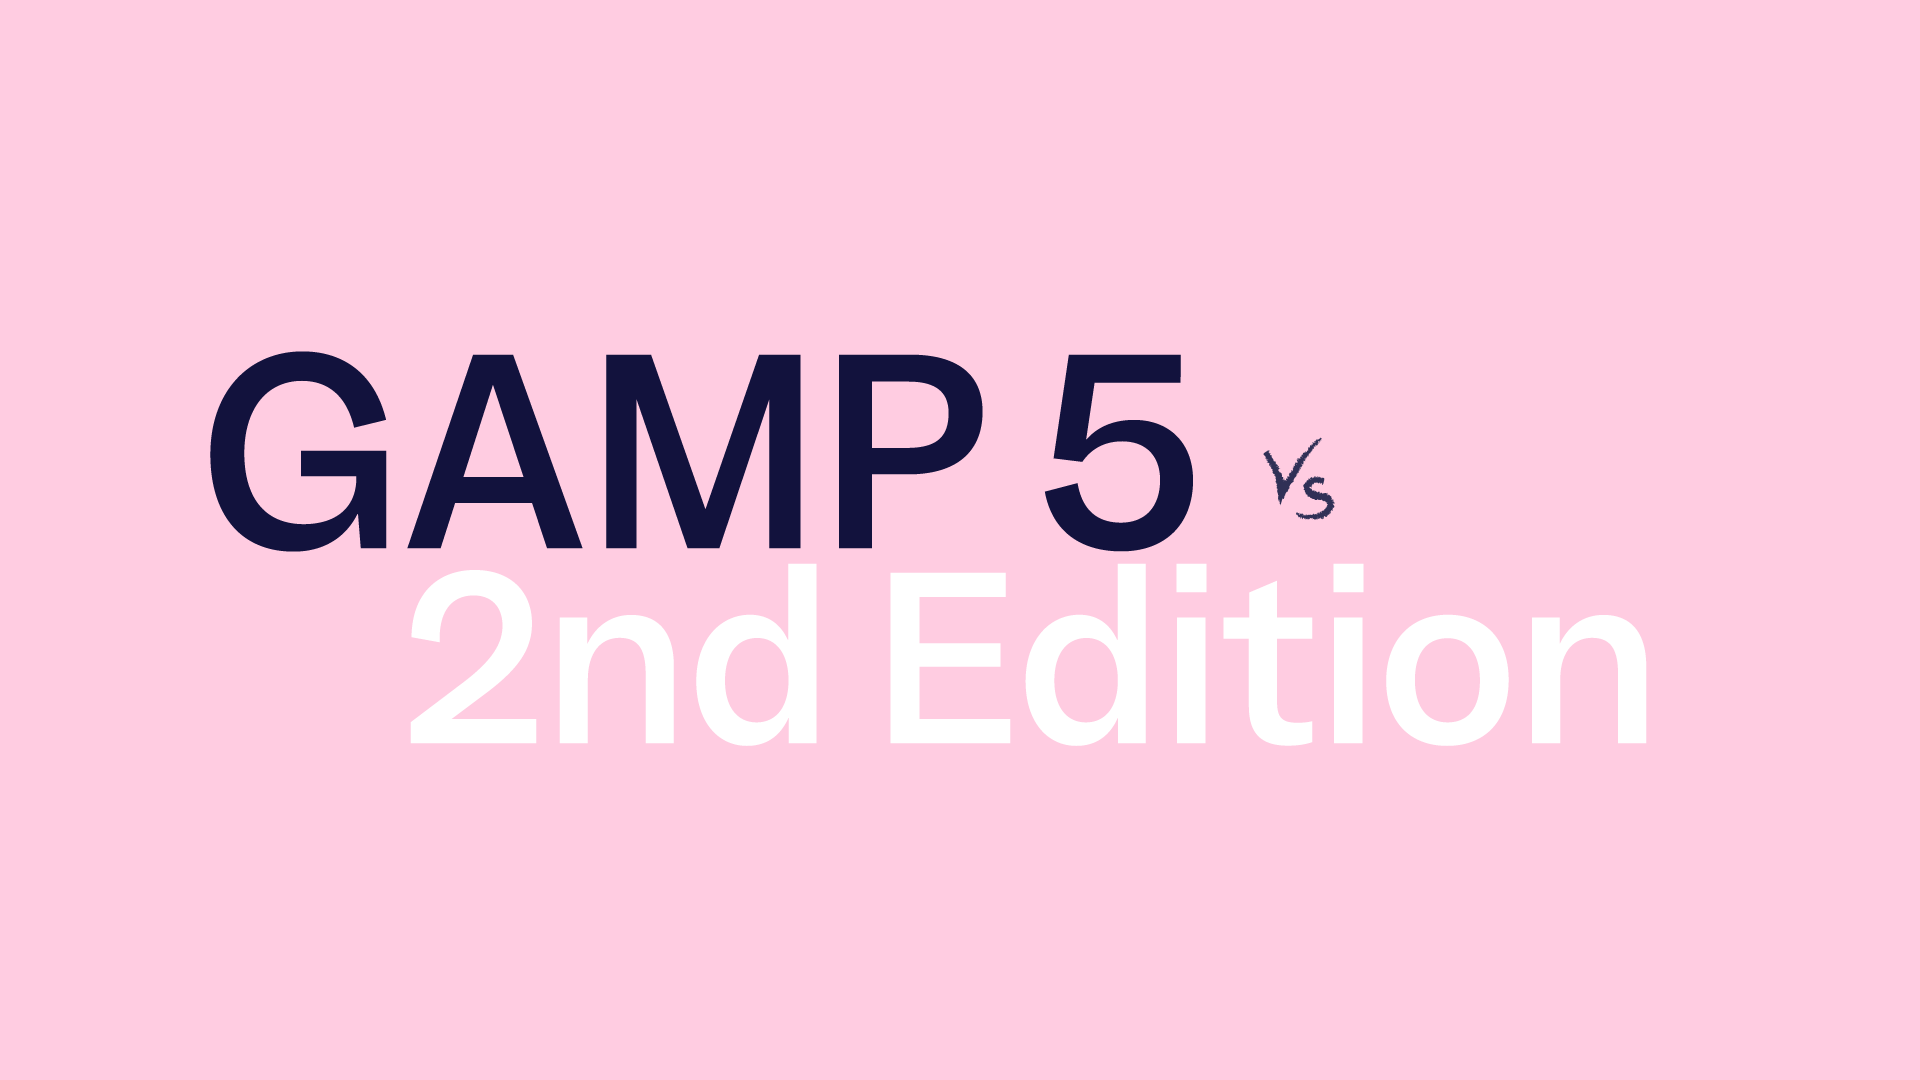 GAMP 5 and GAMP 5 2nd Edition: What are the main differences? | Scilife